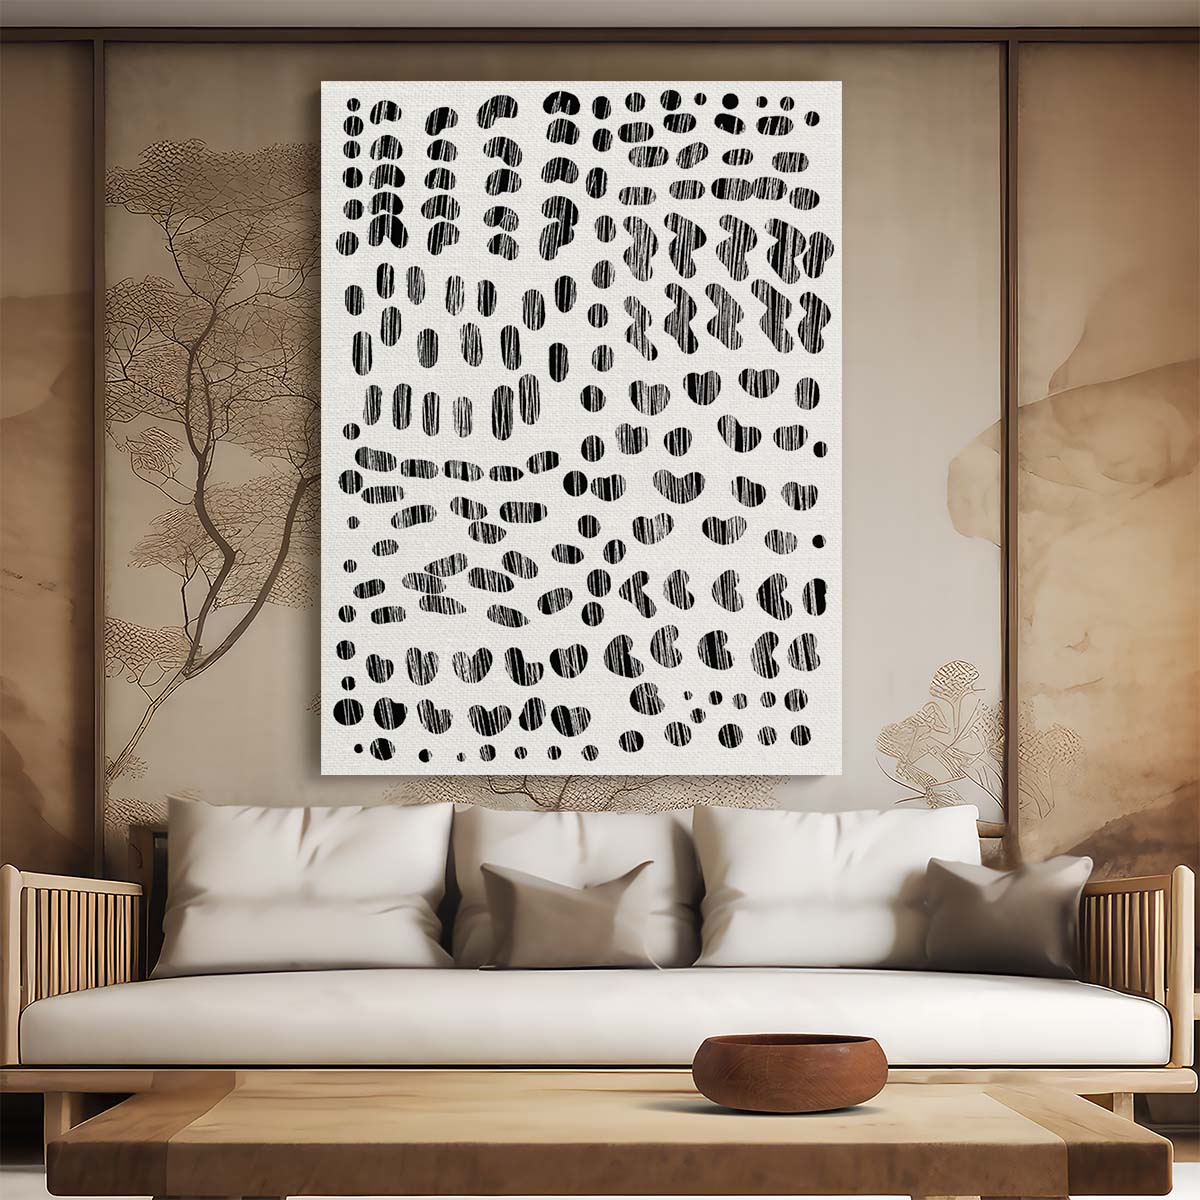 Modern Minimalistic Abstract Illustration by Dan Hobday - Monochrome Lines by Luxuriance Designs, made in USA